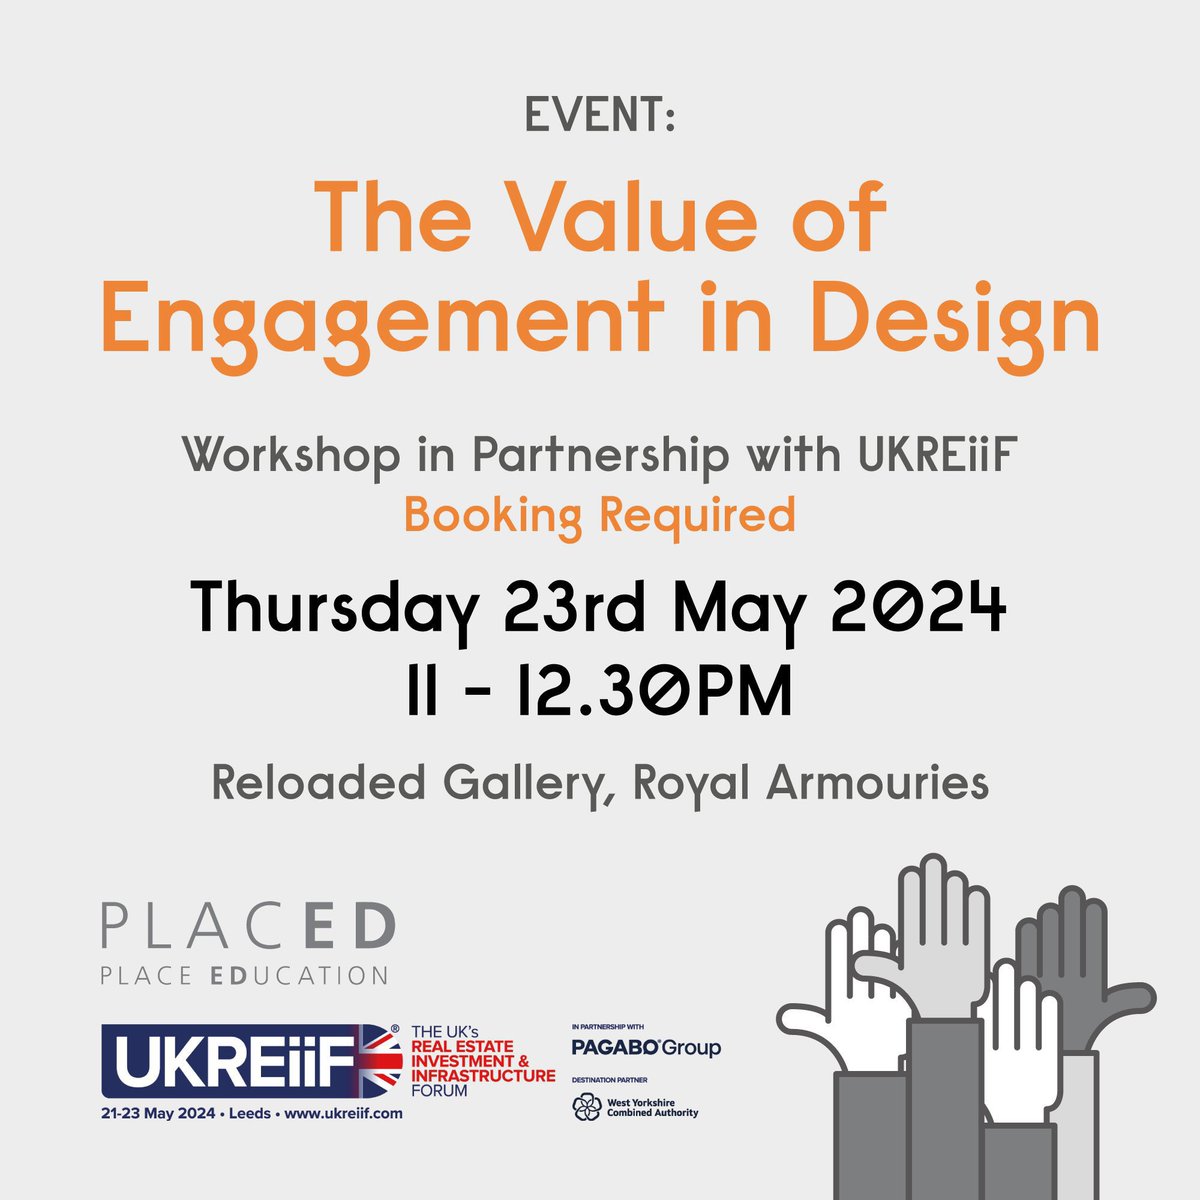 Limited spaces remaining for our workshop in partnership with @UKREiiF ⏰ THURS 23RD MAY, 11-12.30PM Drawing on our experience in practice, the session will take an interactive, participatory and collaborative approach! Email: kim@placed.org.uk to express interest! #PLACED